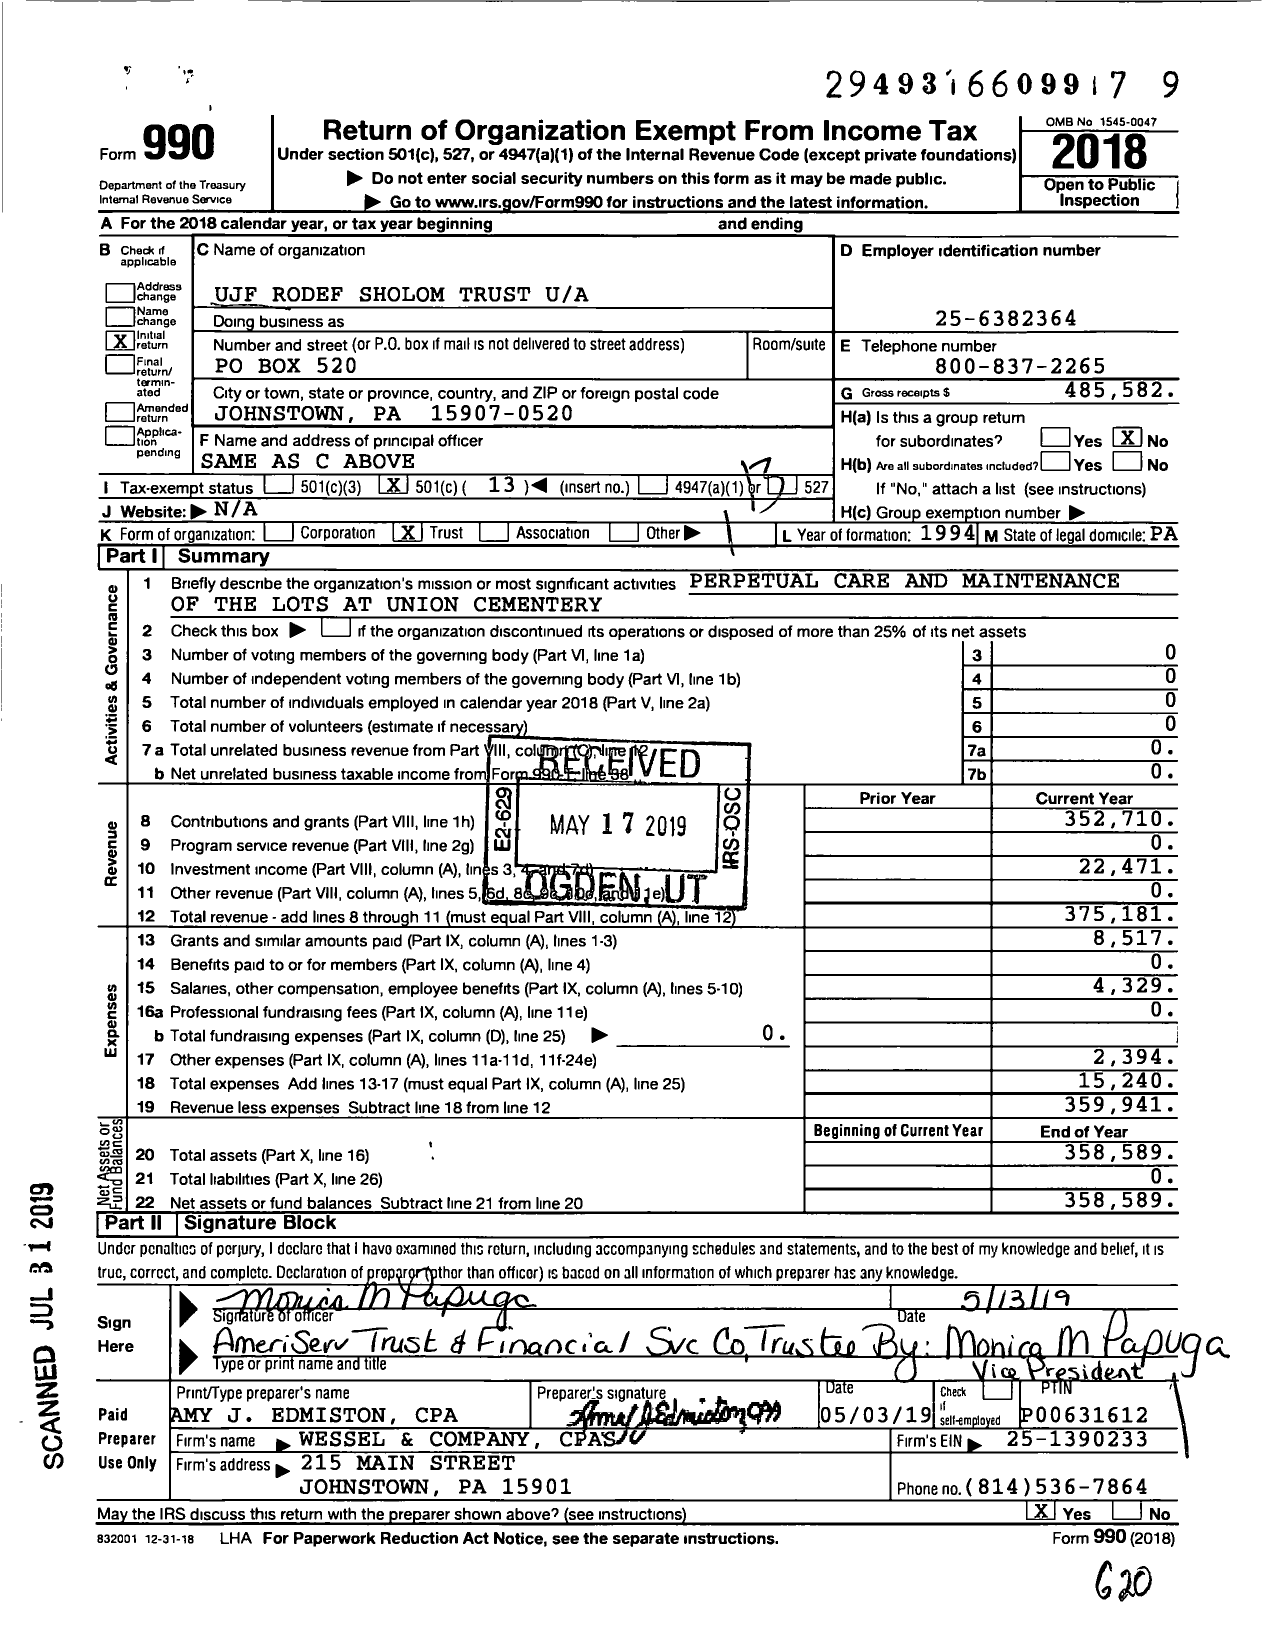 Image of first page of 2018 Form 990O for Ujf Rodef Sholom Trust